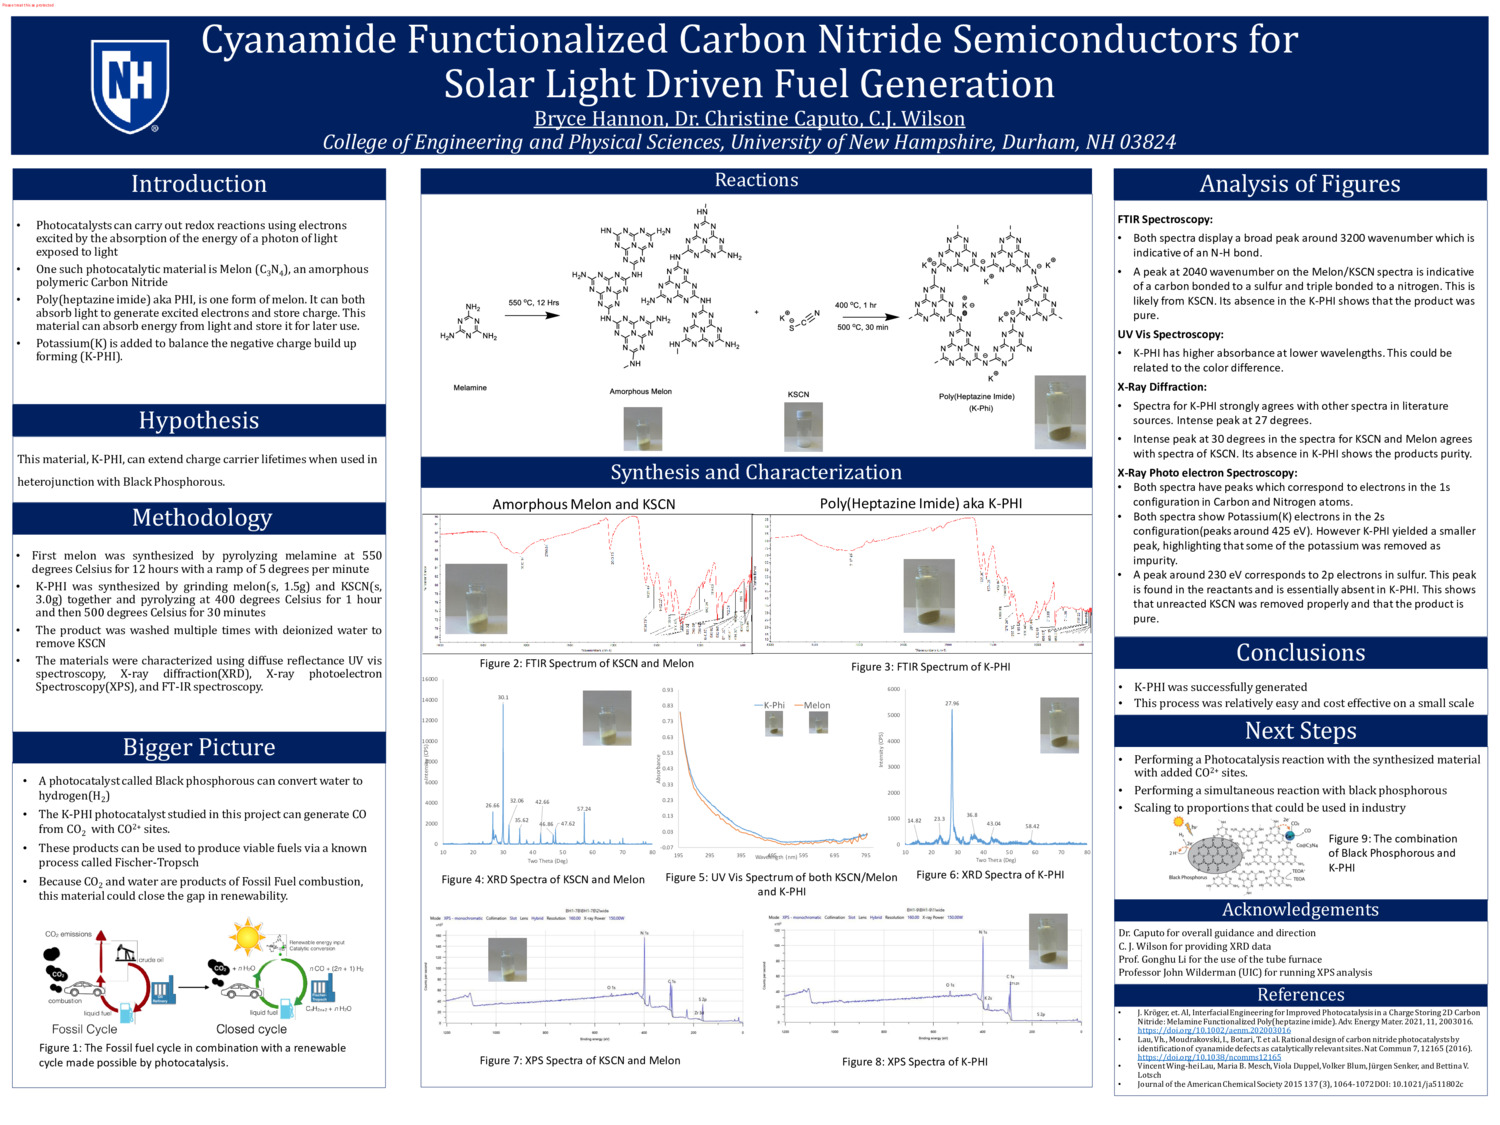 Cyanamide Functionalized Carbon Nitride Semiconductors For Solar Light Driven Fuel Generation by bh1166